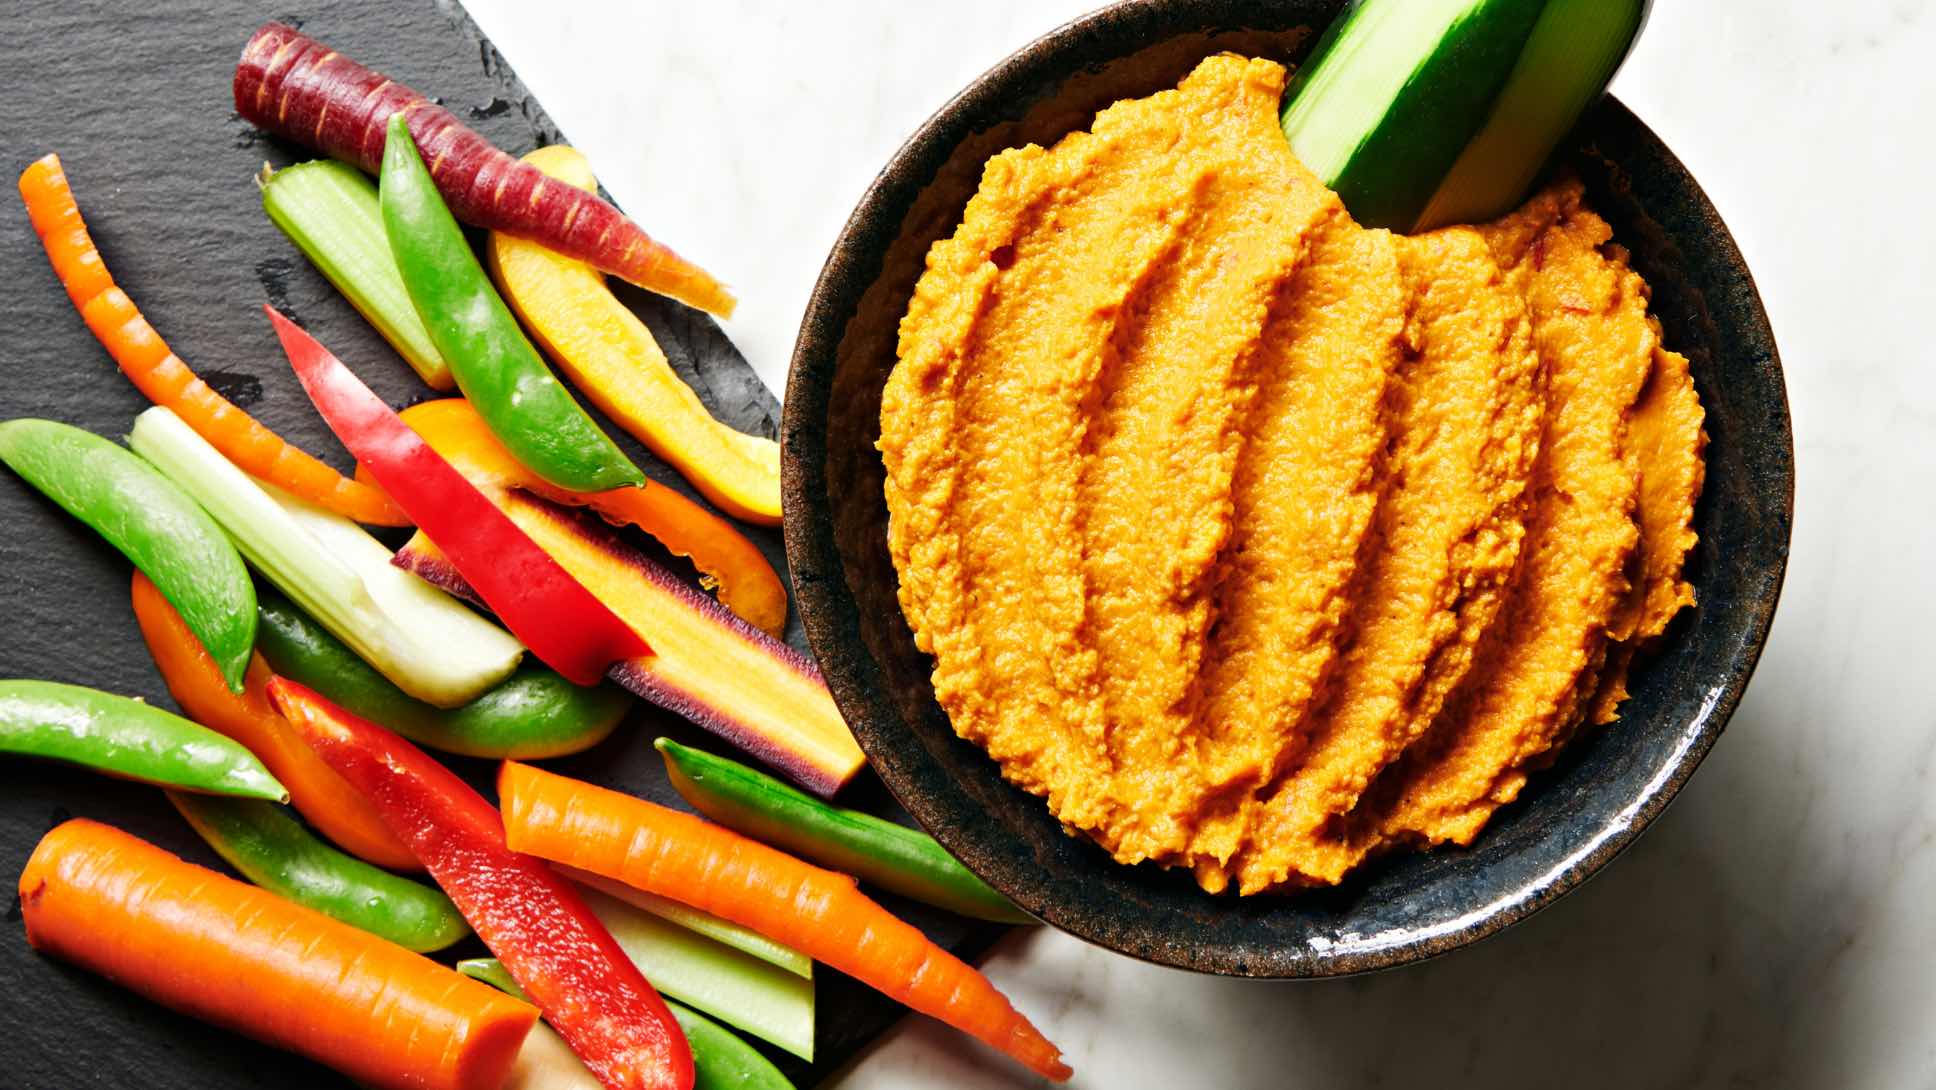 A bowl of Harvest Hummus with raw, sliced veggies on the side.